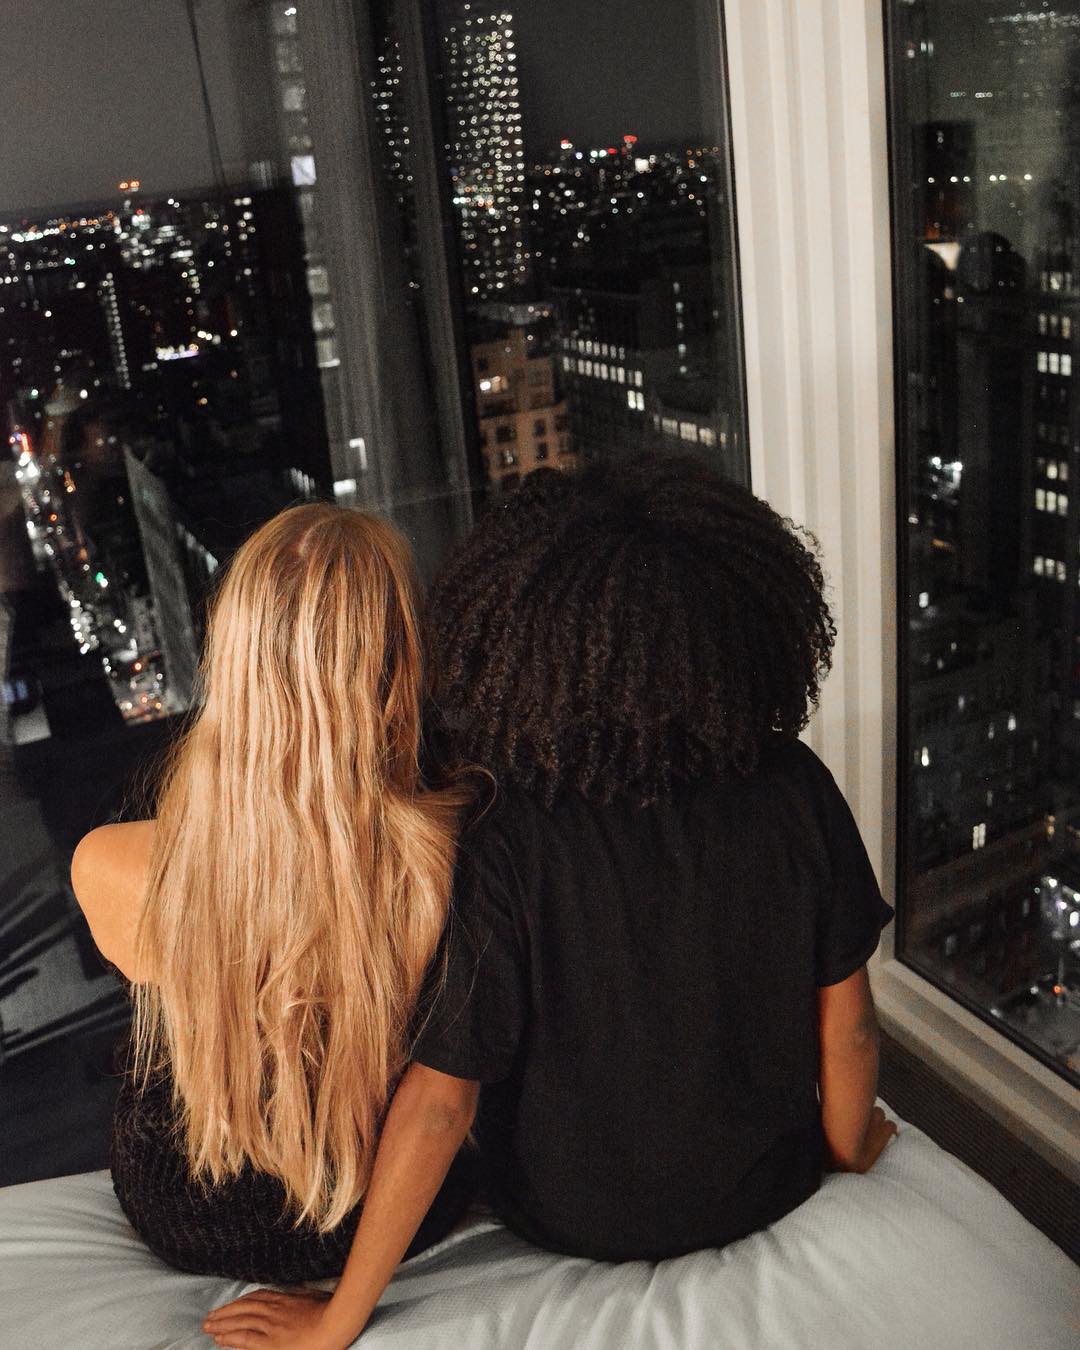 Couple Overlooking a City at Night from a Hotel Room. Photo by Instagram user @theangelinos_